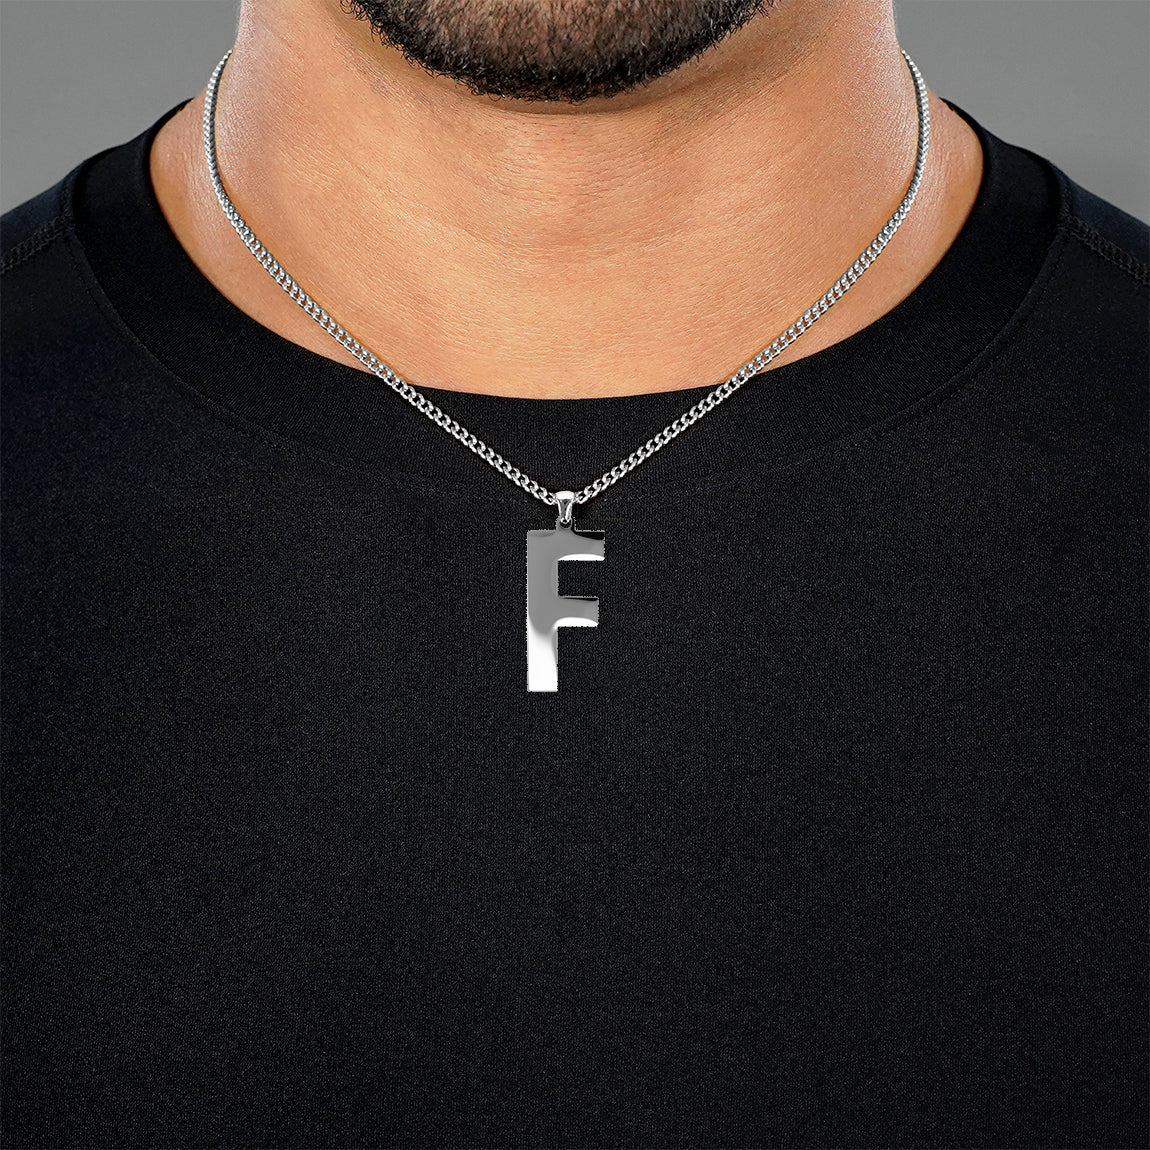 F Letter Pendant with Chain Necklace - Stainless Steel